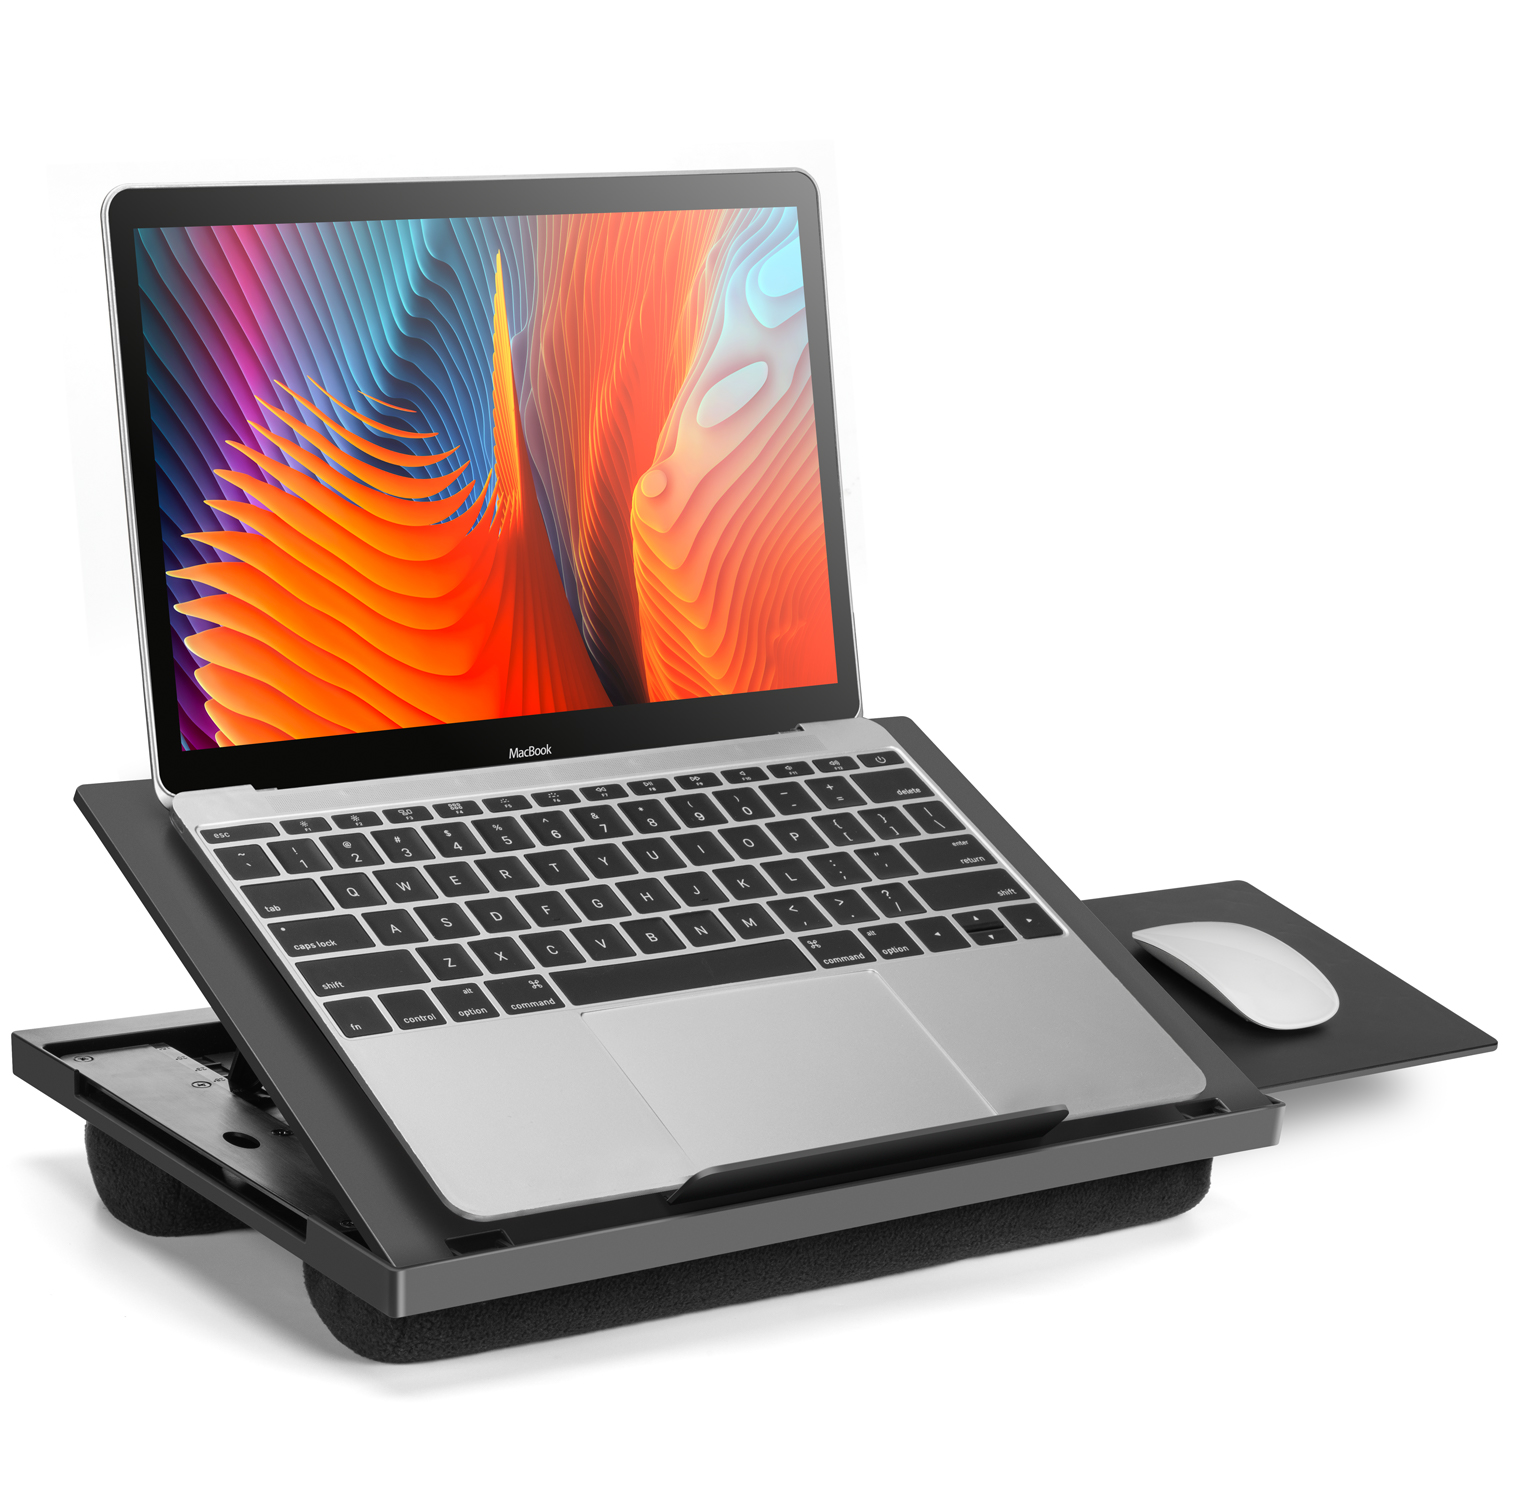 Adjustable Laptop Lap Desk Fits up to 15.6" with 6 Adjustable Angles, Detachable Mouse Pad, & Dual Cushions - image 1 of 8